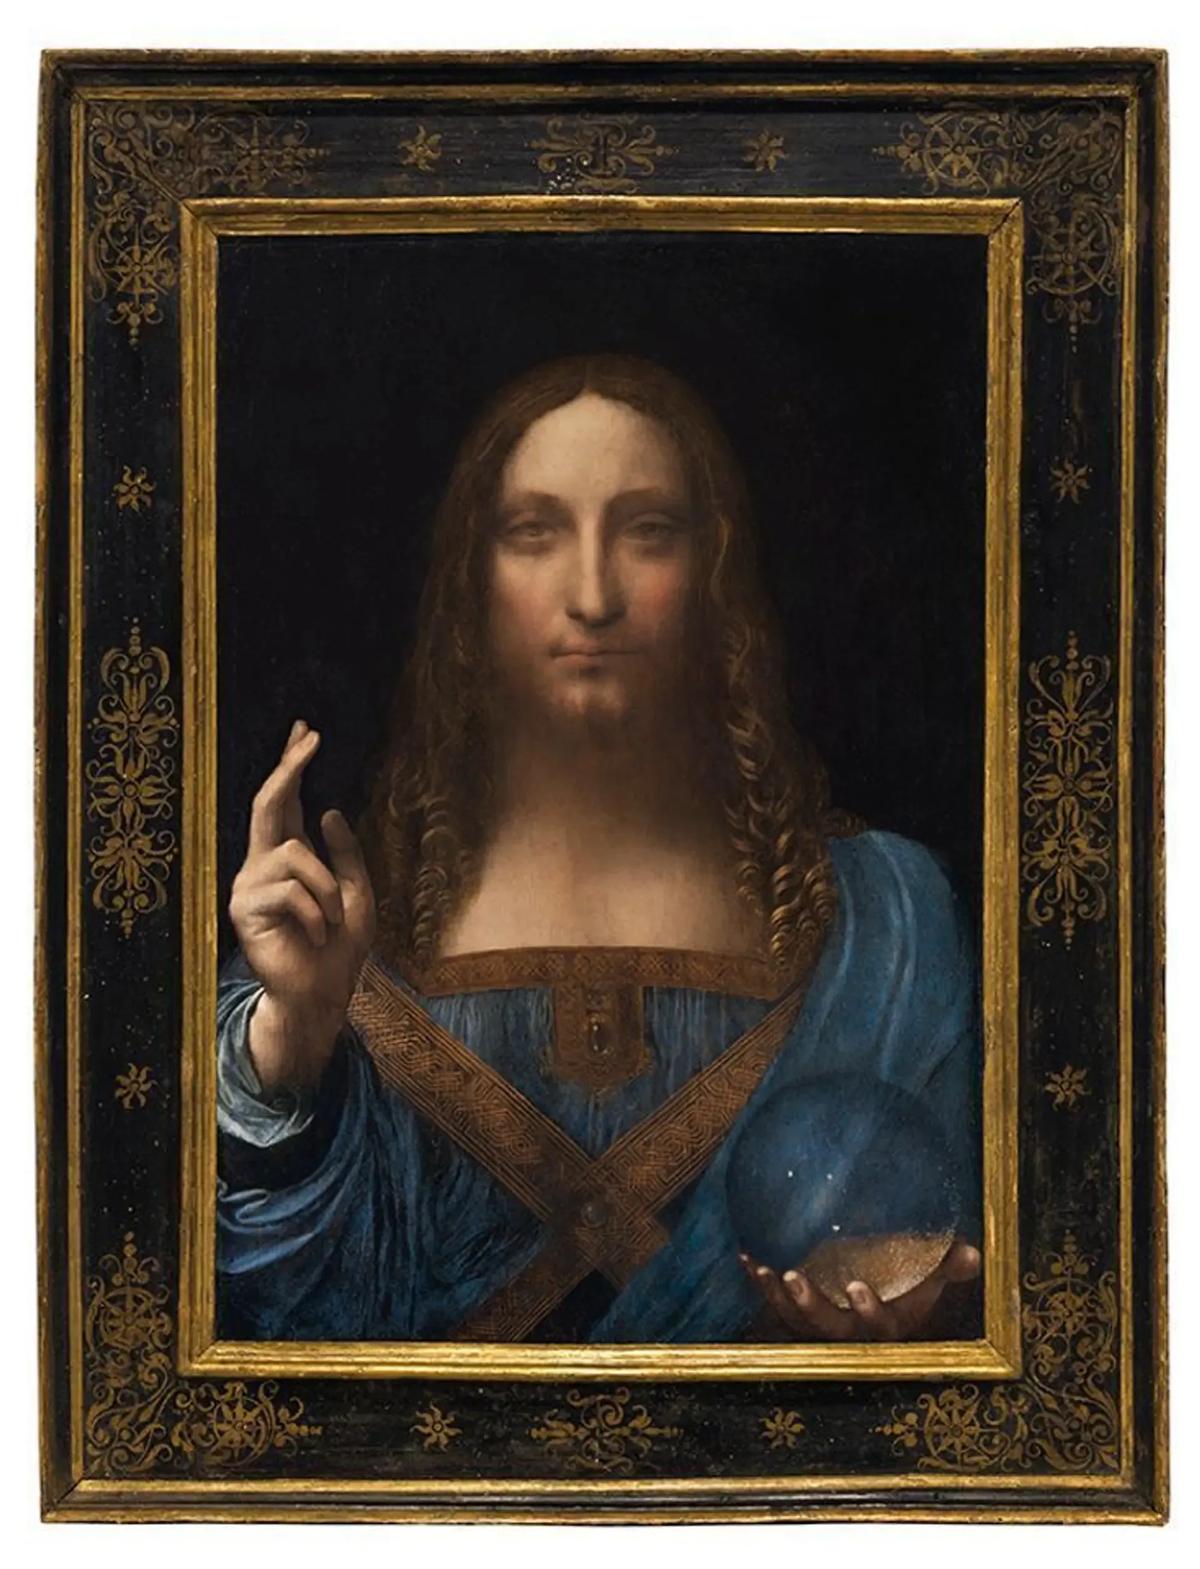 Questions continue over the attribution of the Gulf Salvator Mundi, which sold for $450m (with fees) in 2017 at Christie’s in New York